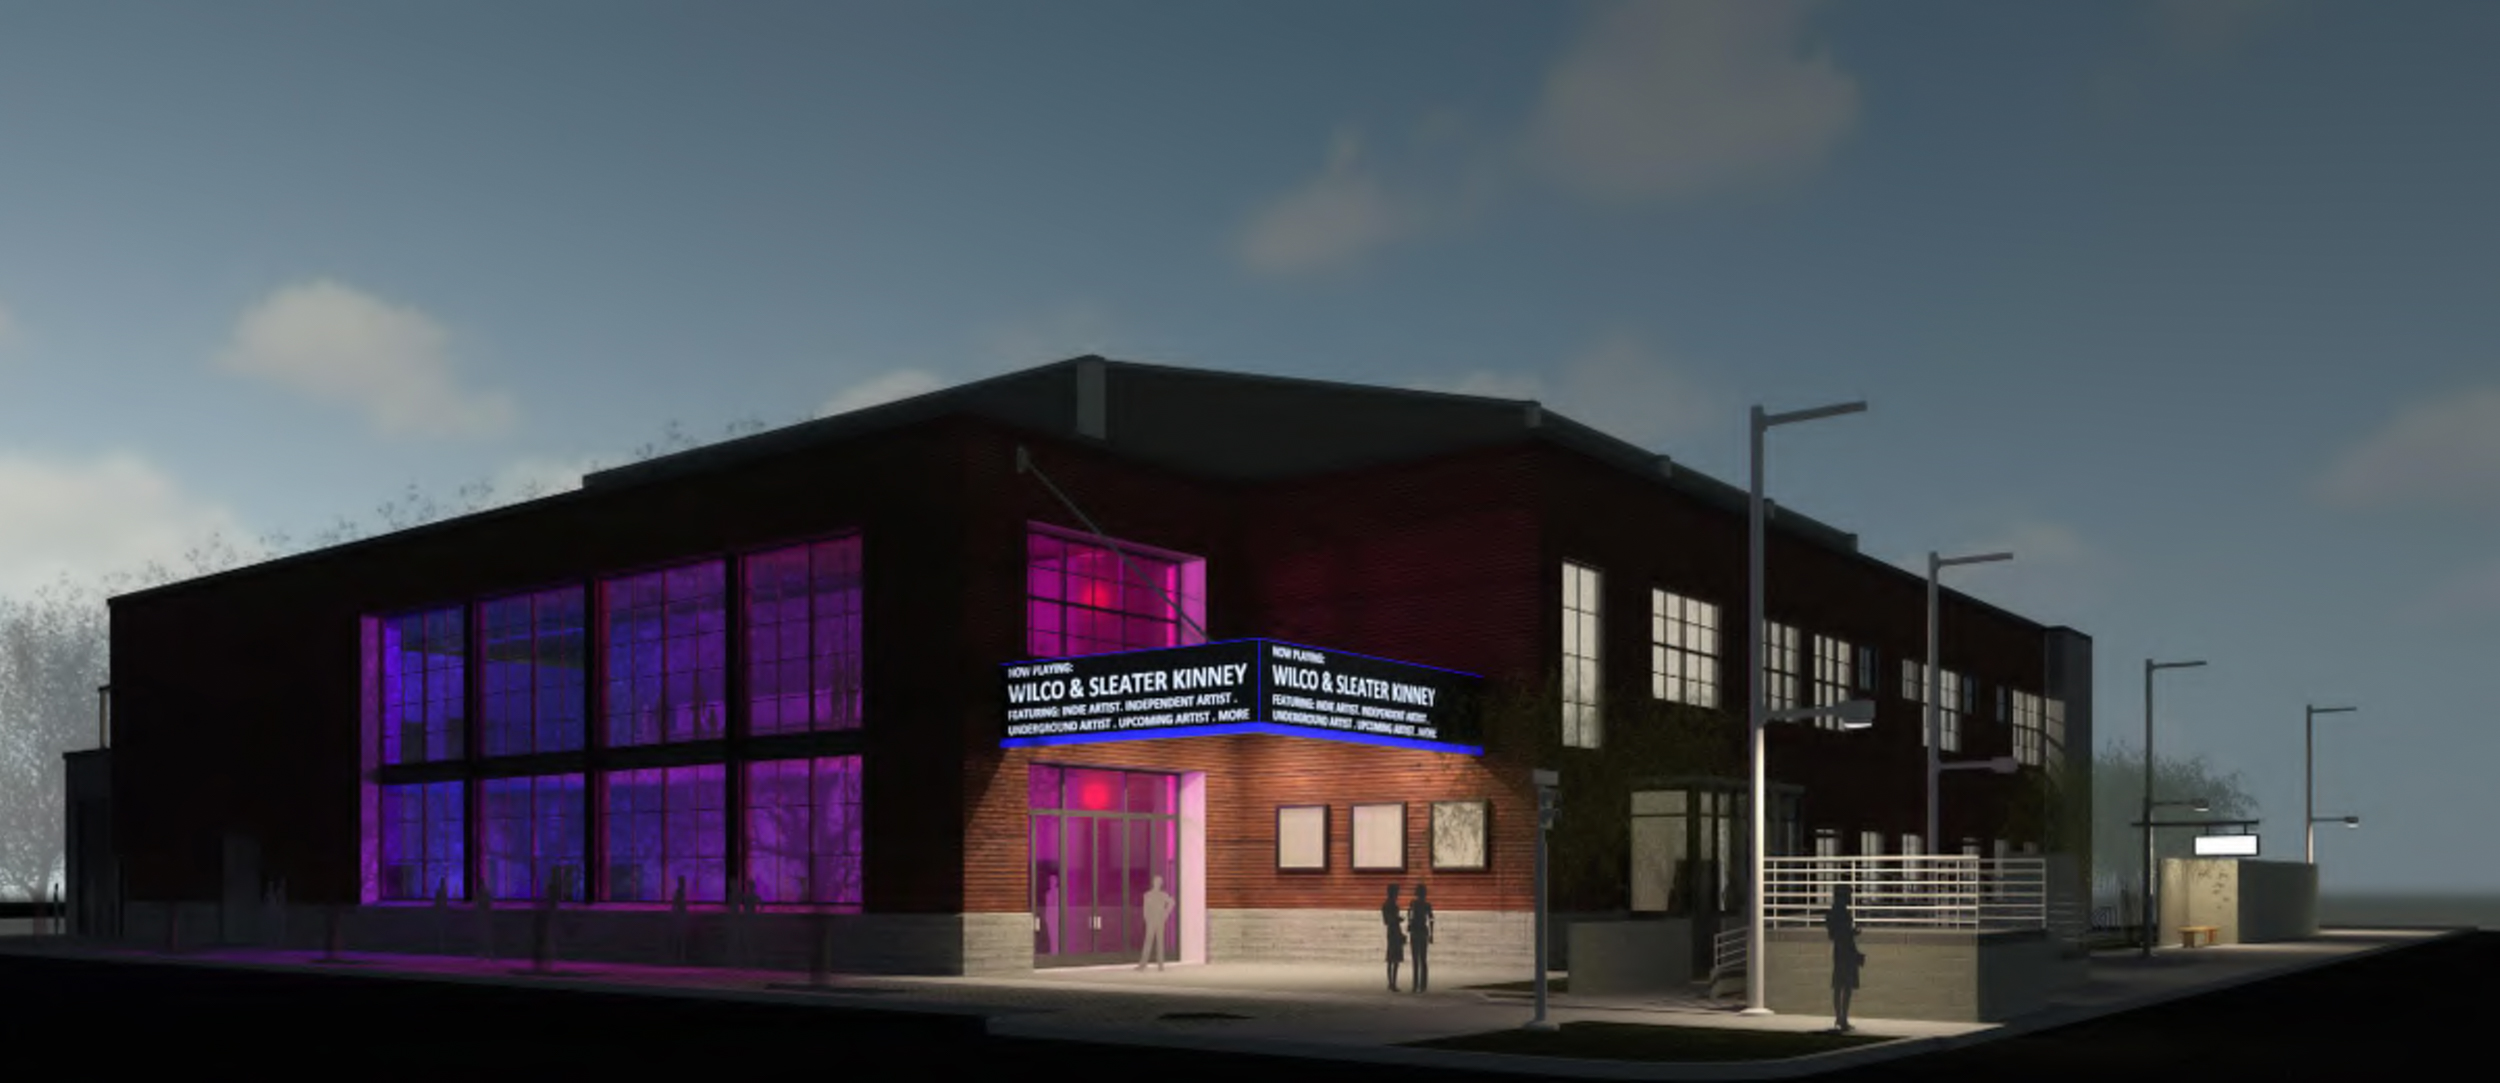 24R Theater at 1800 24th Street evening view, rendering via CAW and Ellis Architects